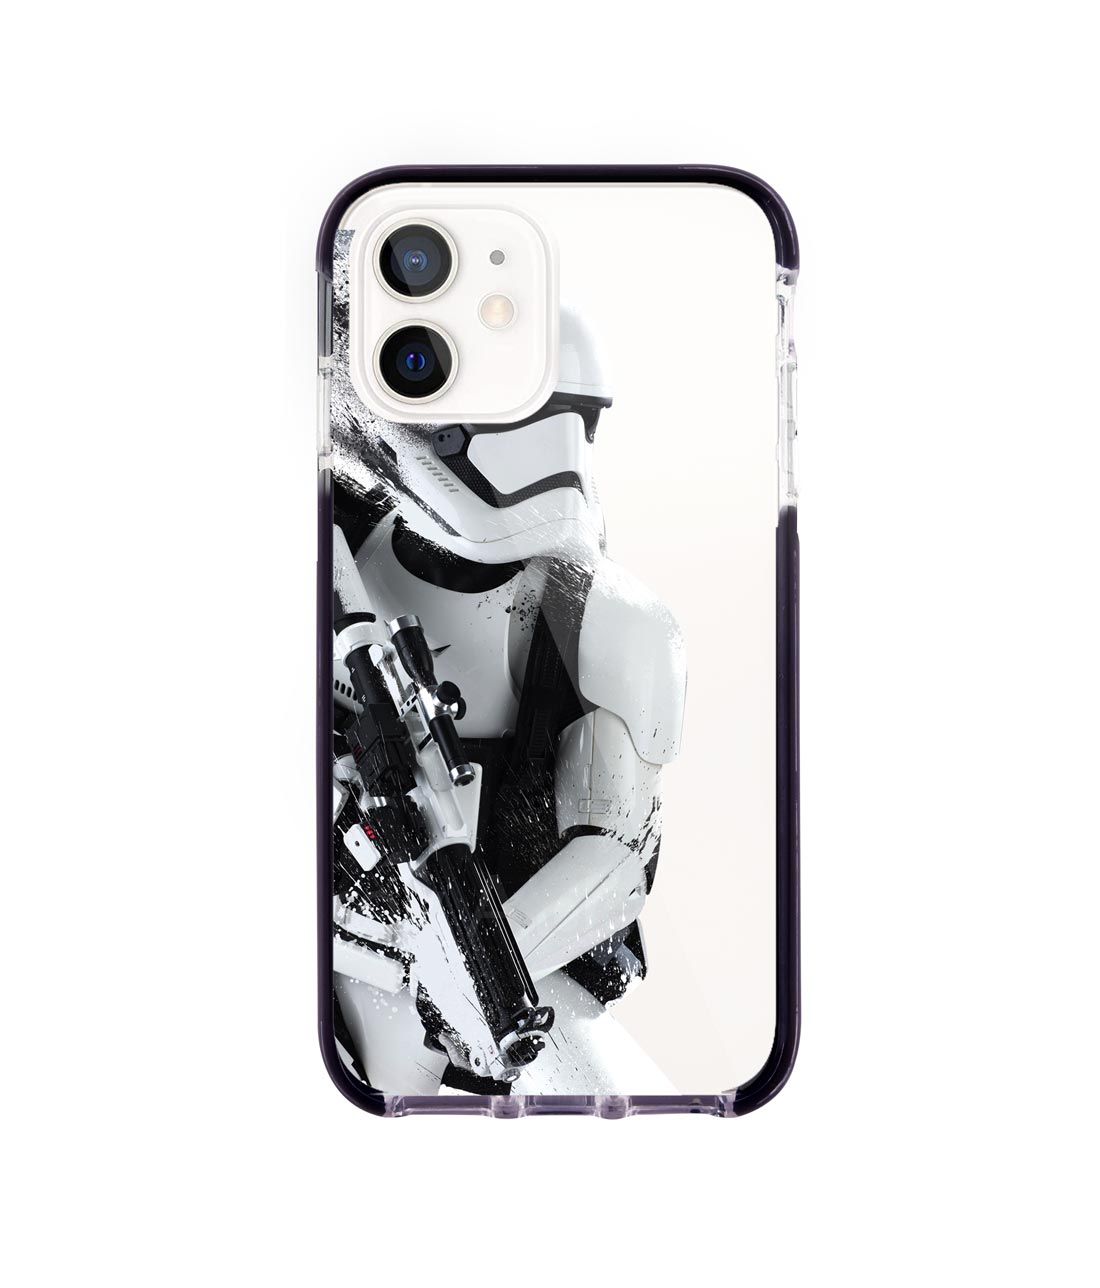 Trooper Storm - Extreme Case for iPhone 12 Mini